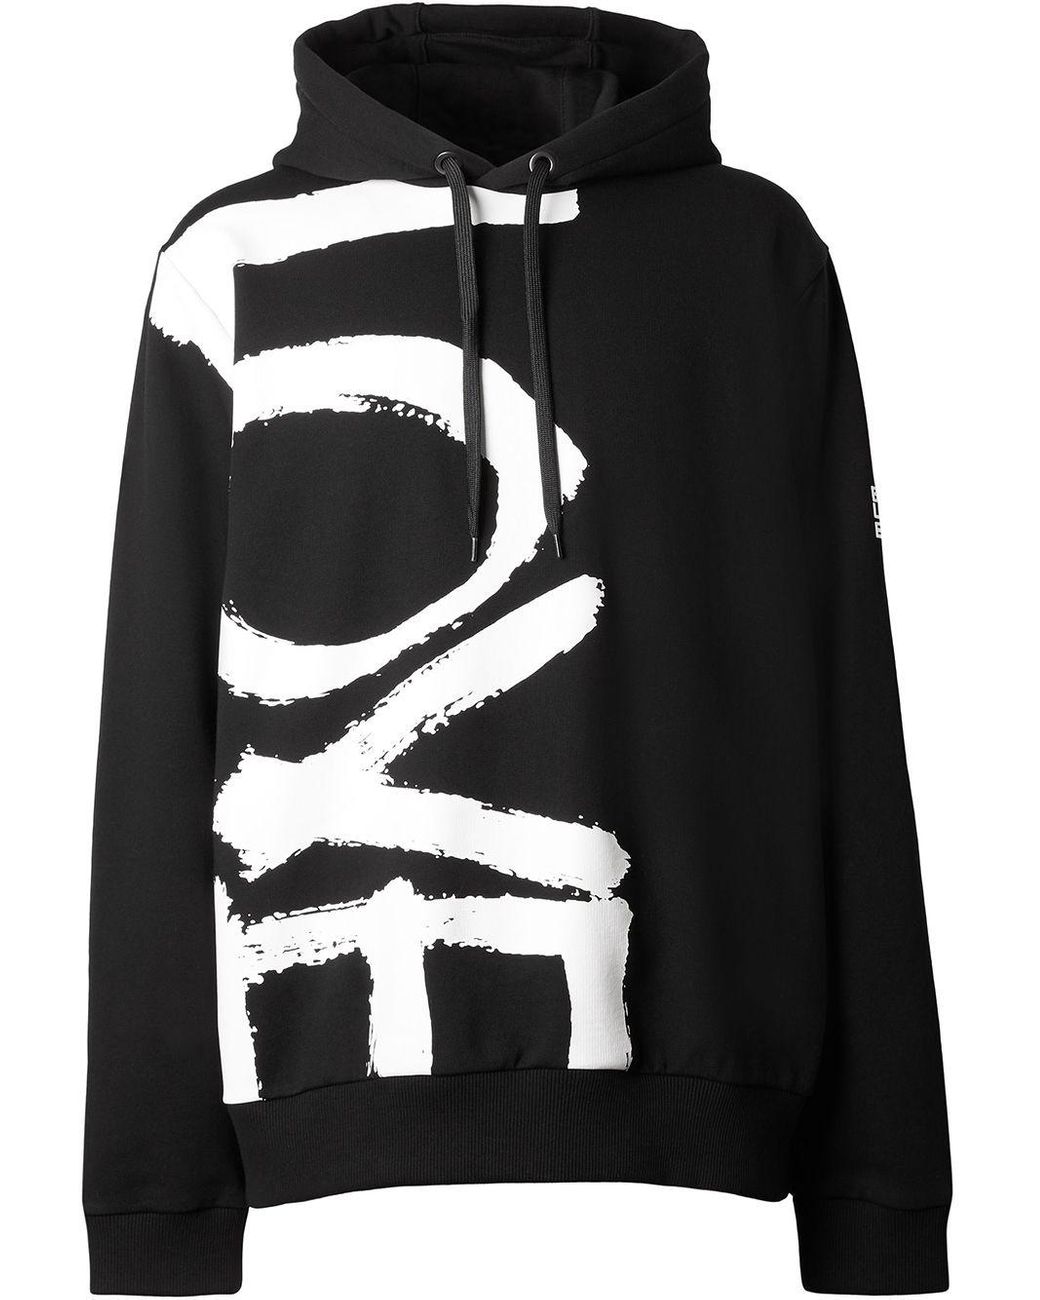 Burberry Cotton Love Print Hoodie in Black for Men - Lyst